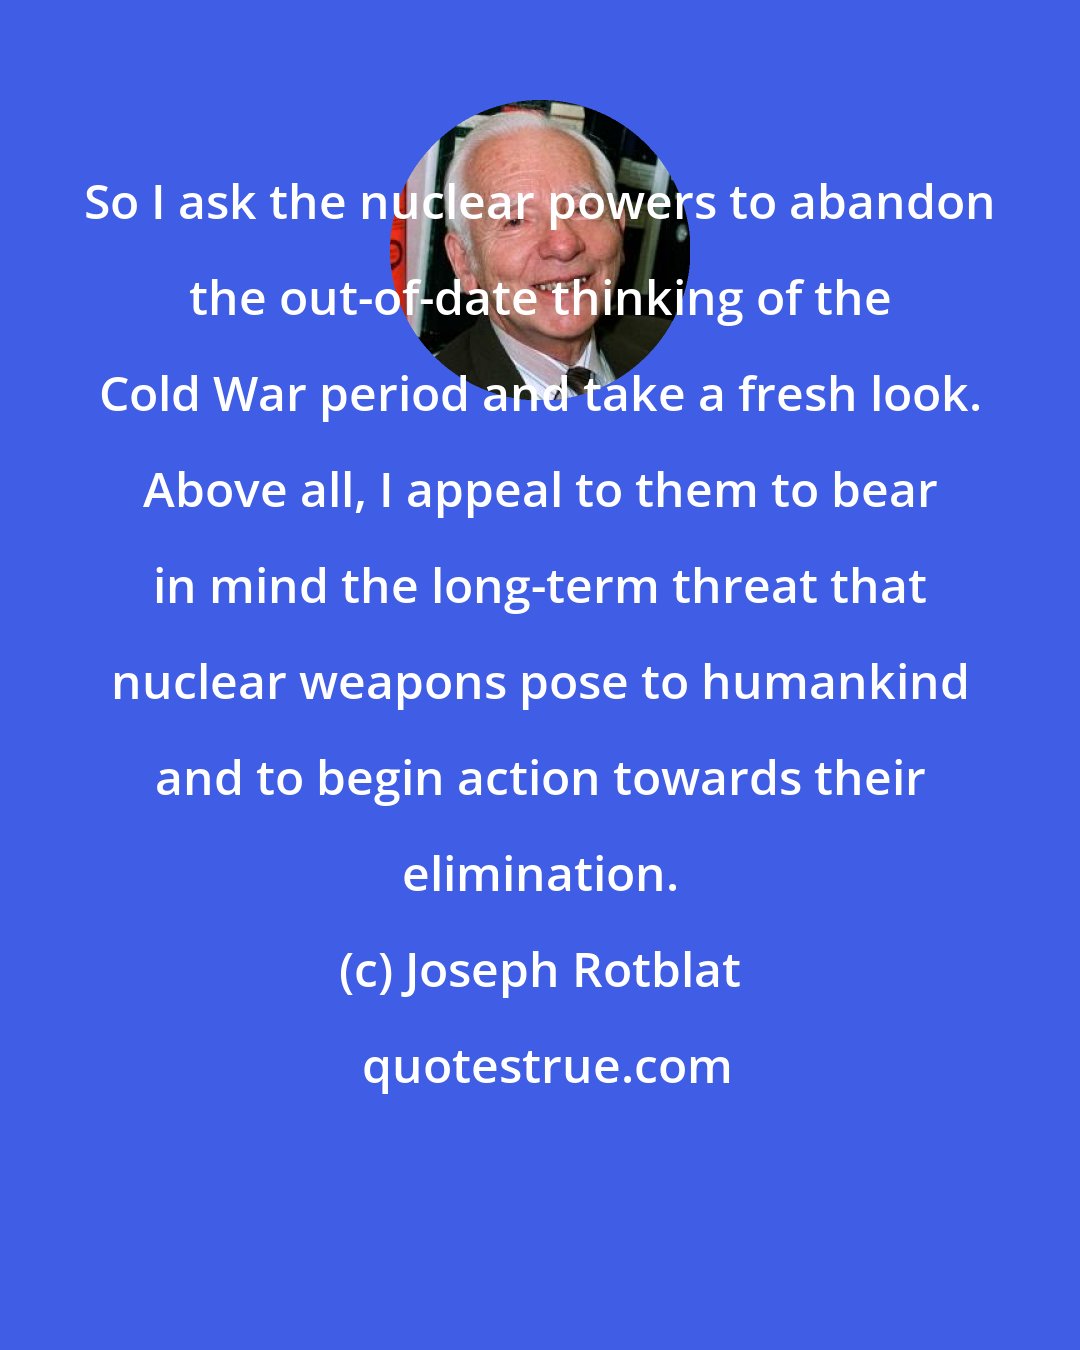 Joseph Rotblat: So I ask the nuclear powers to abandon the out-of-date thinking of the Cold War period and take a fresh look. Above all, I appeal to them to bear in mind the long-term threat that nuclear weapons pose to humankind and to begin action towards their elimination.